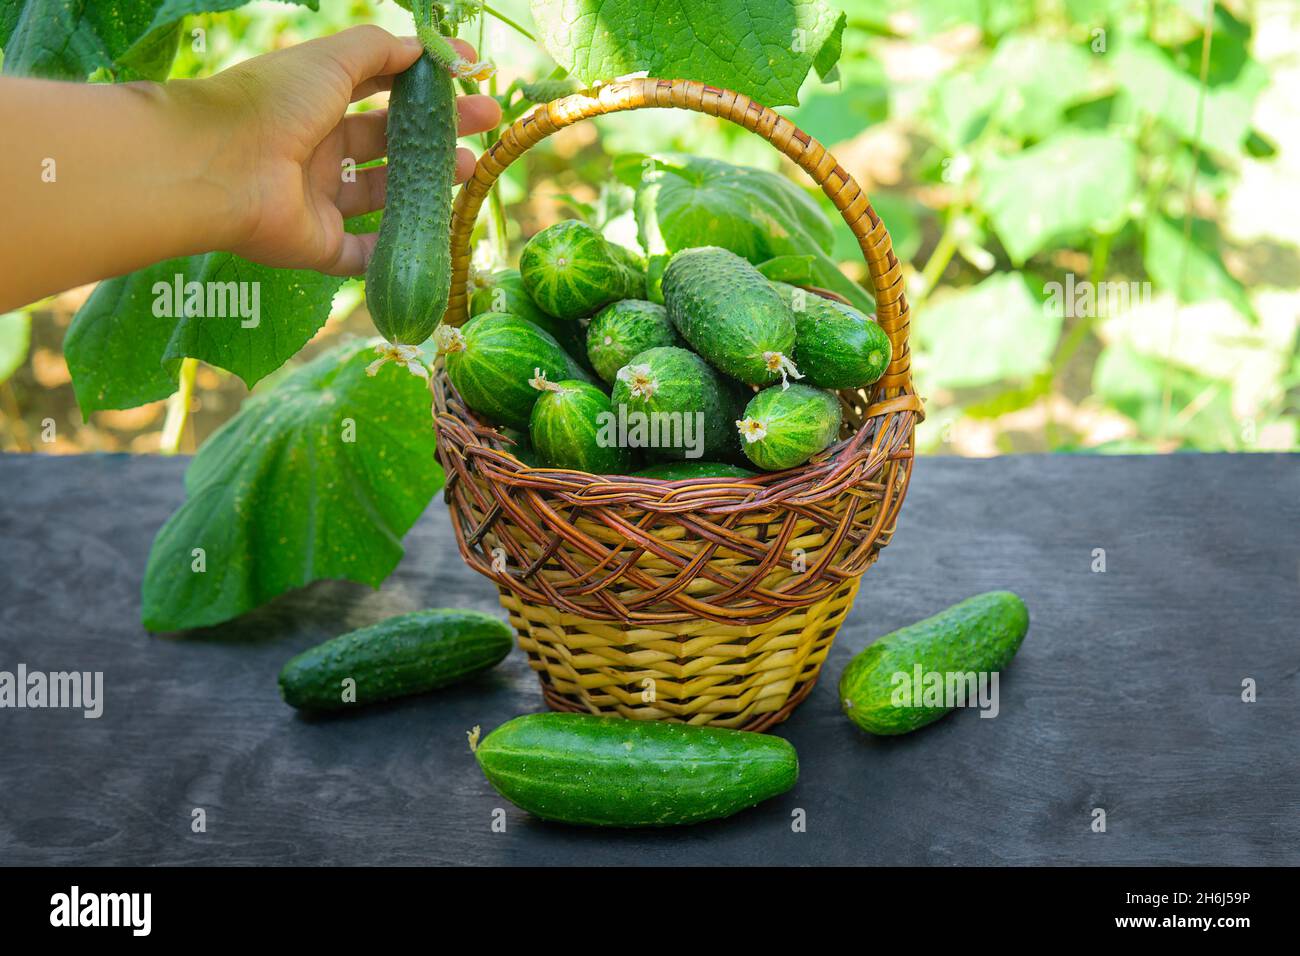 Female hand holding a ripe cucumber on the vine close to a wicker basket full of freshly picked fruits. Organic farming at home. Stock Photo